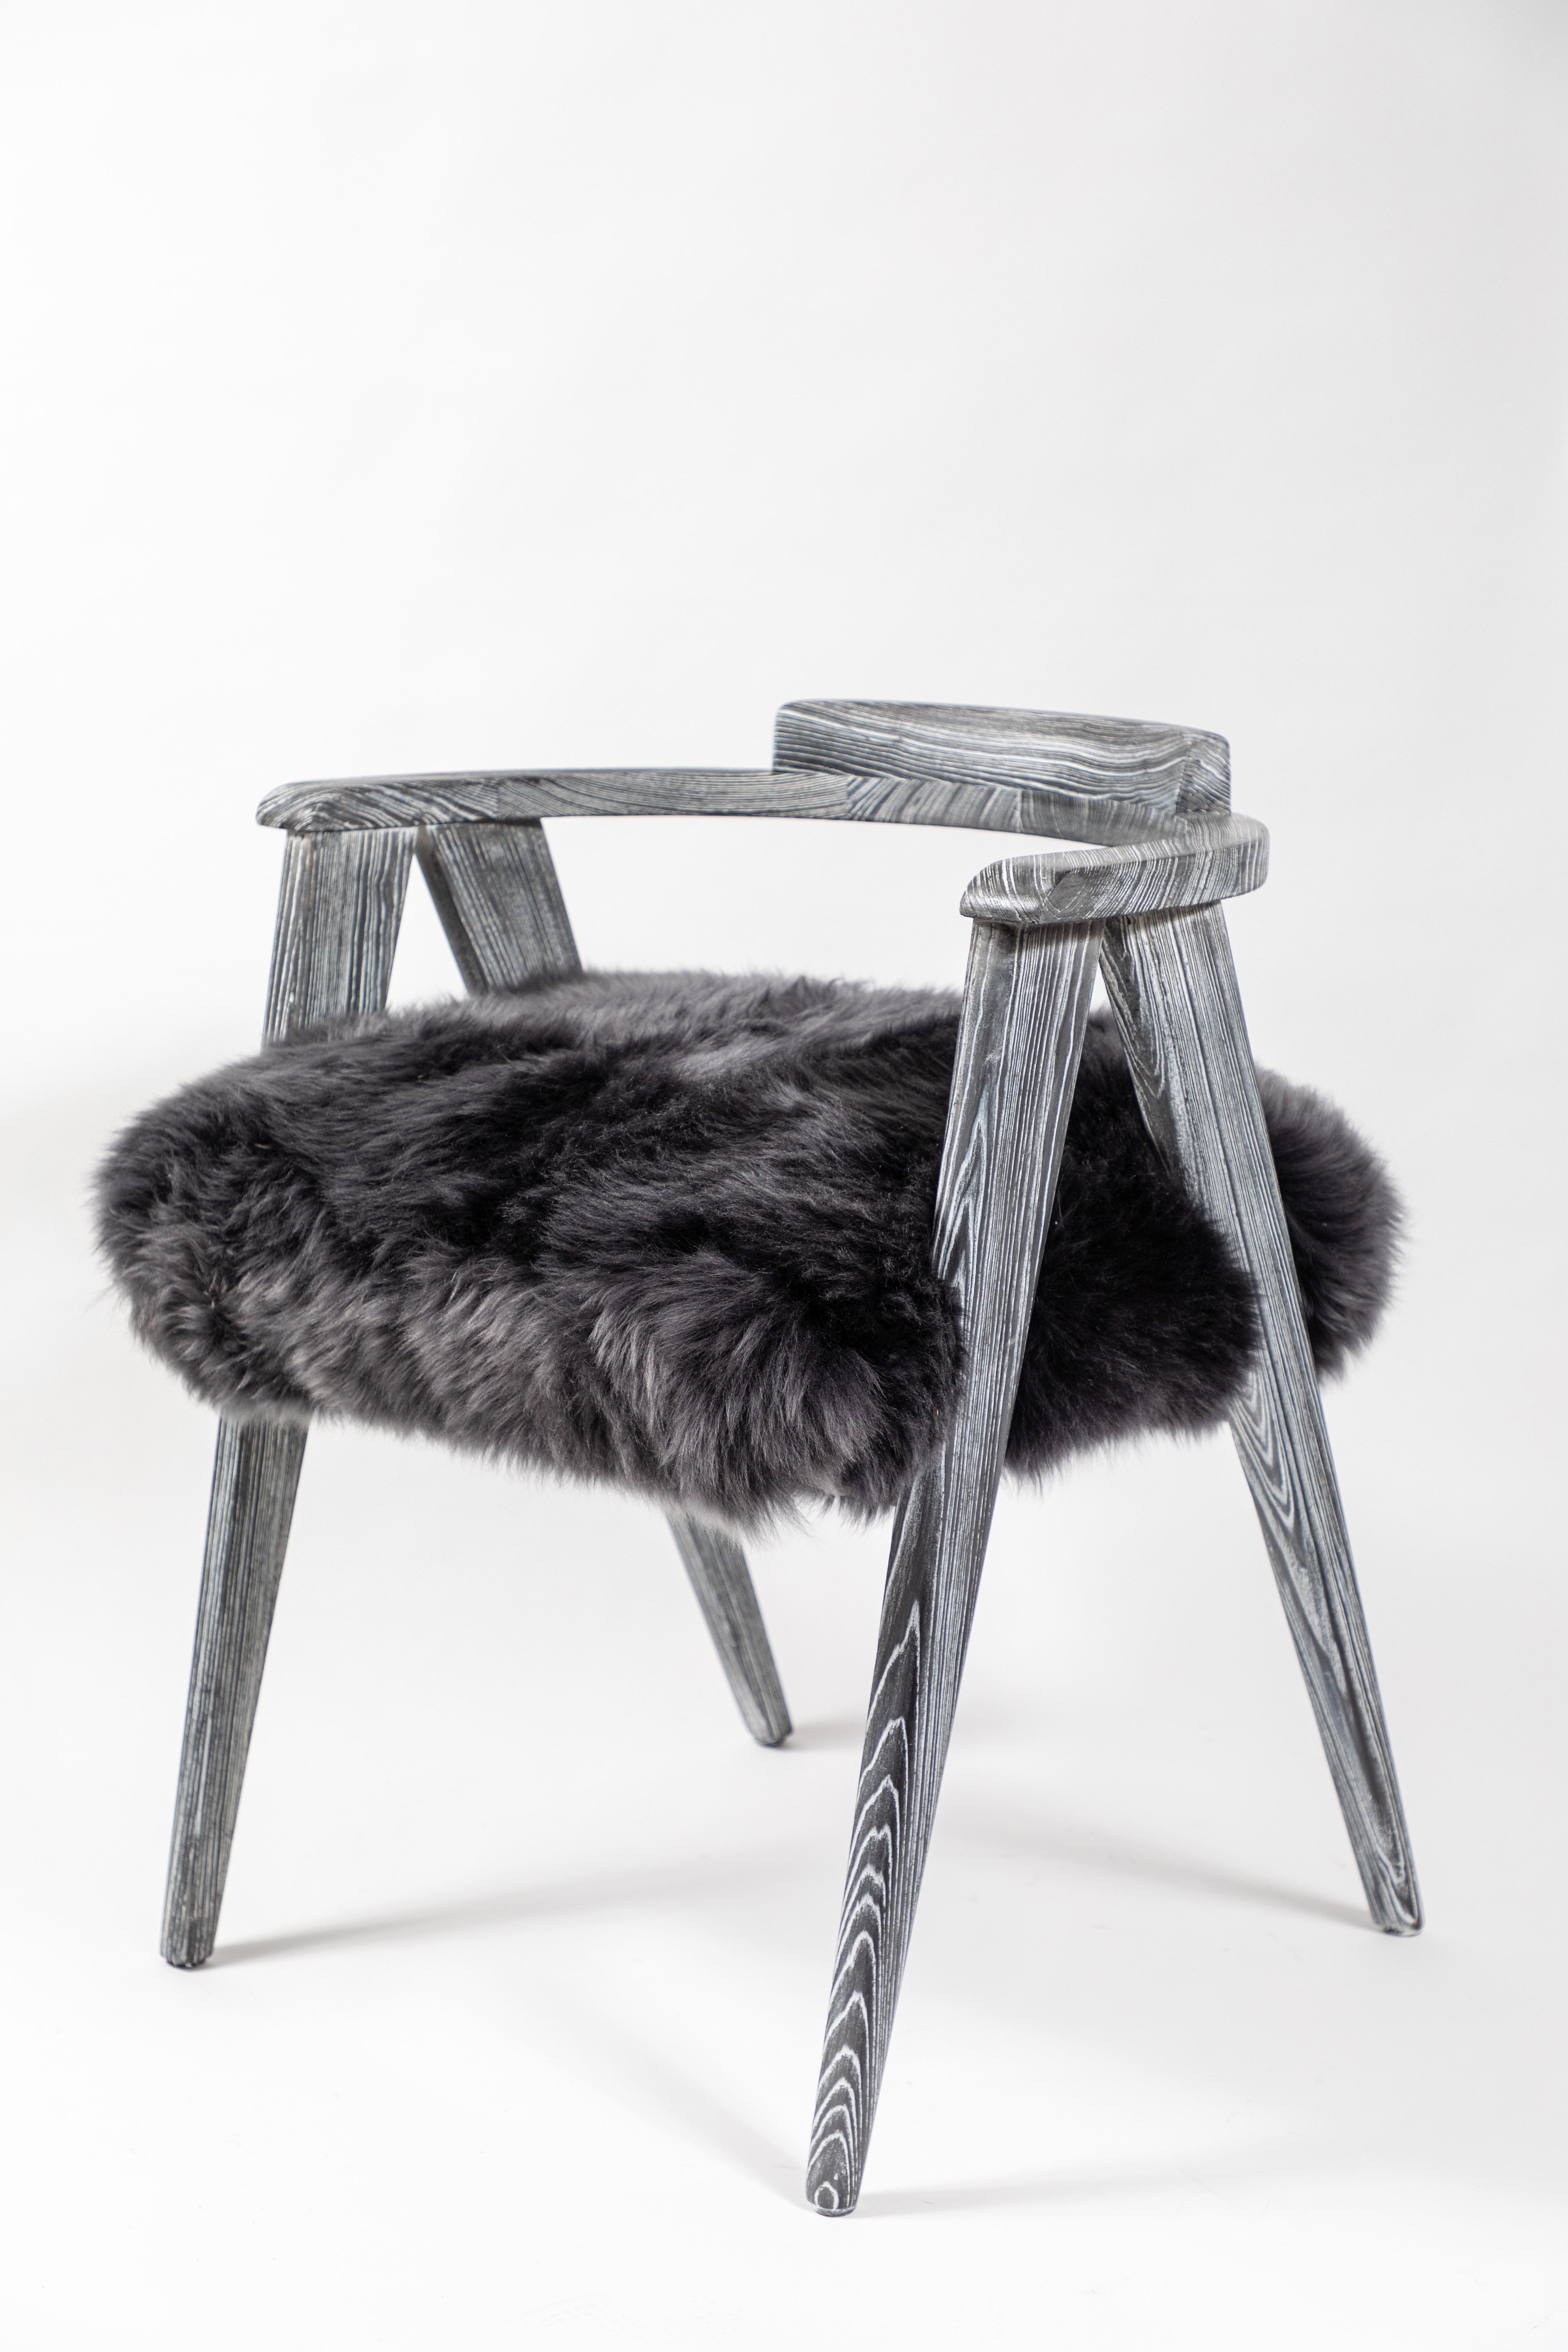 Stylish pair of midcentury chairs with round backs and scissor style legs. Newly refinished in a gray ceruse, the chairs have been upholstered in gray sheepskin fur.